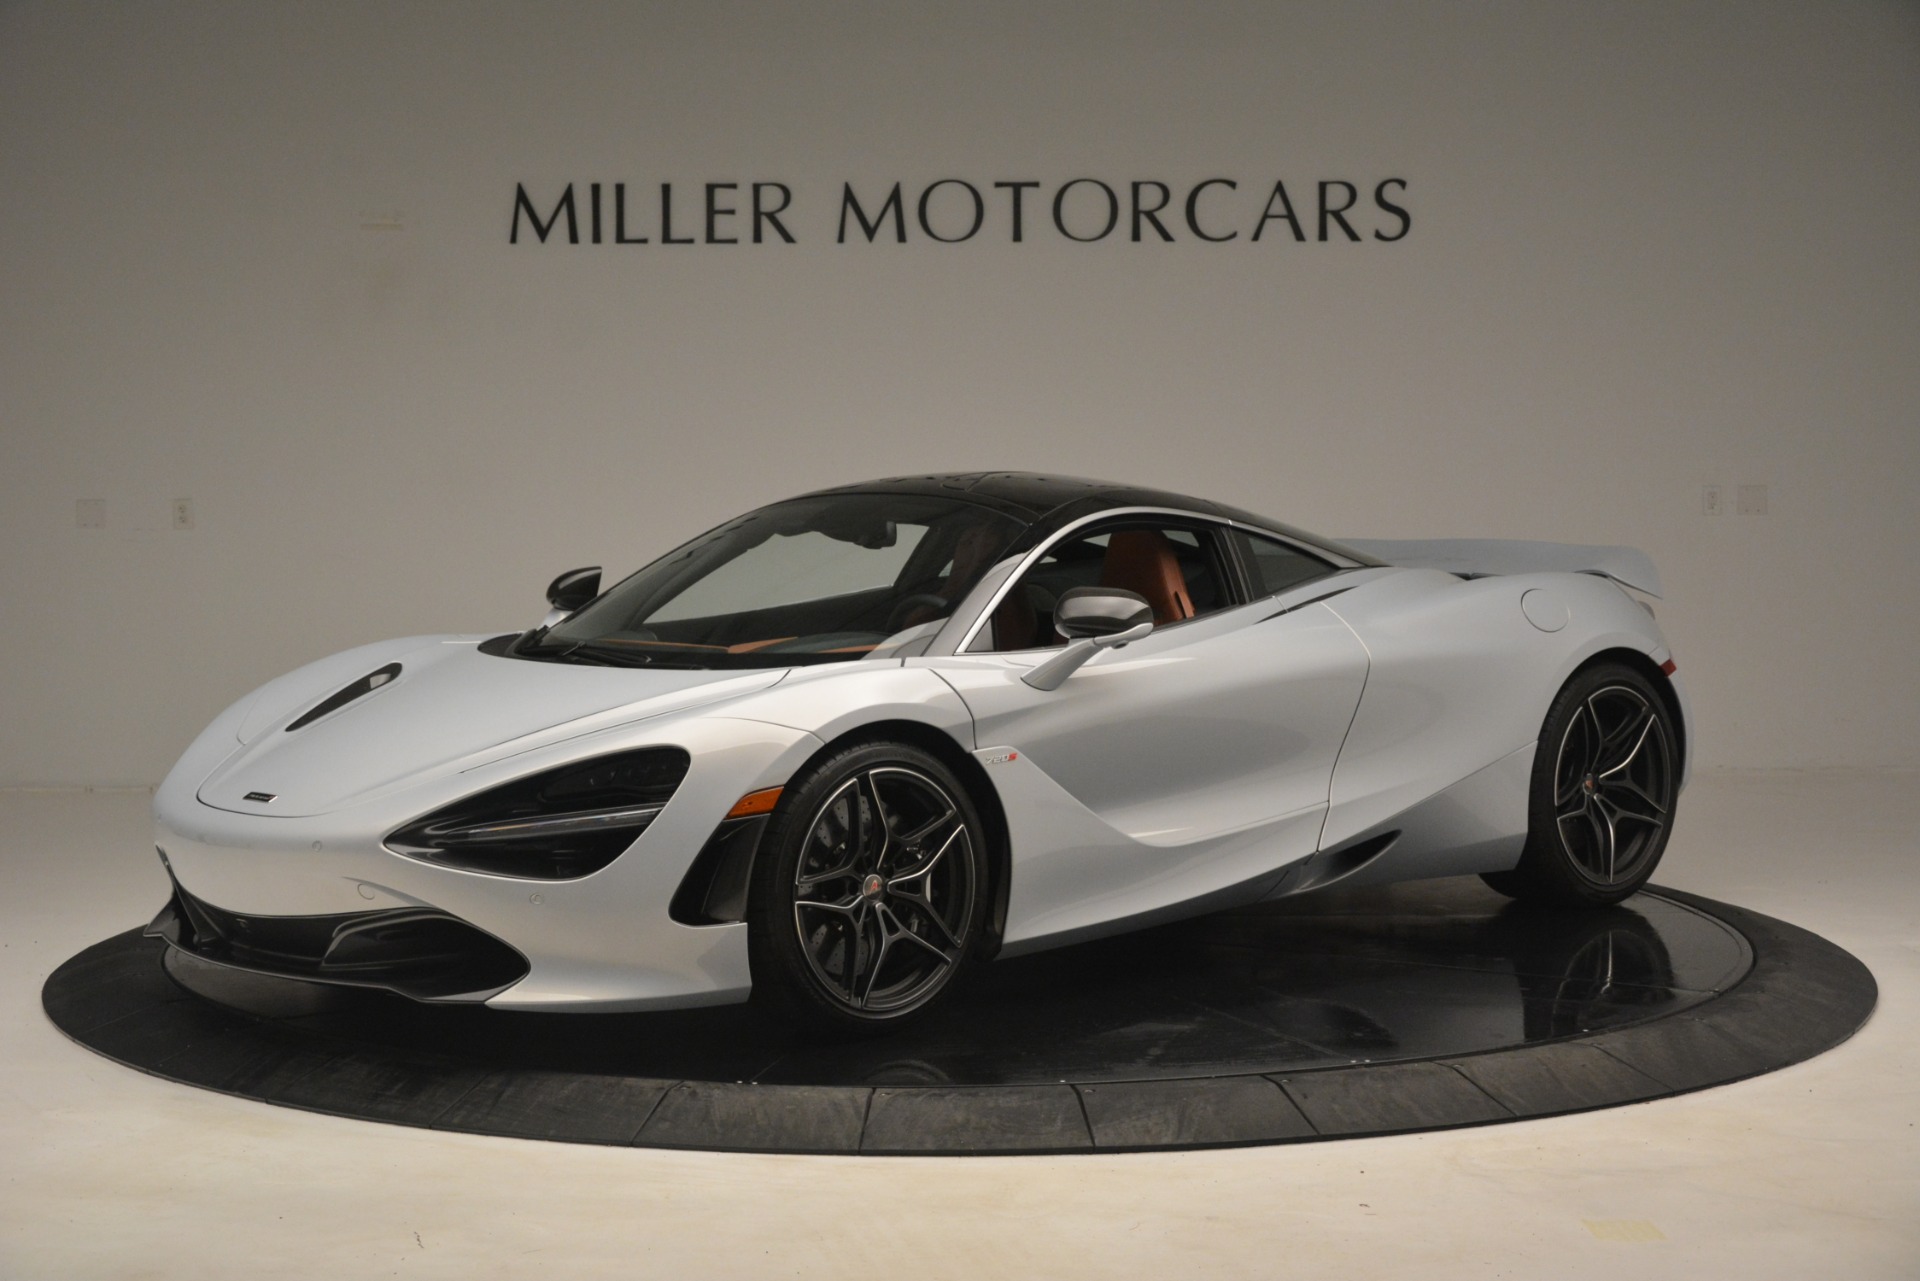 Used 2018 McLaren 720S Coupe for sale Sold at Aston Martin of Greenwich in Greenwich CT 06830 1